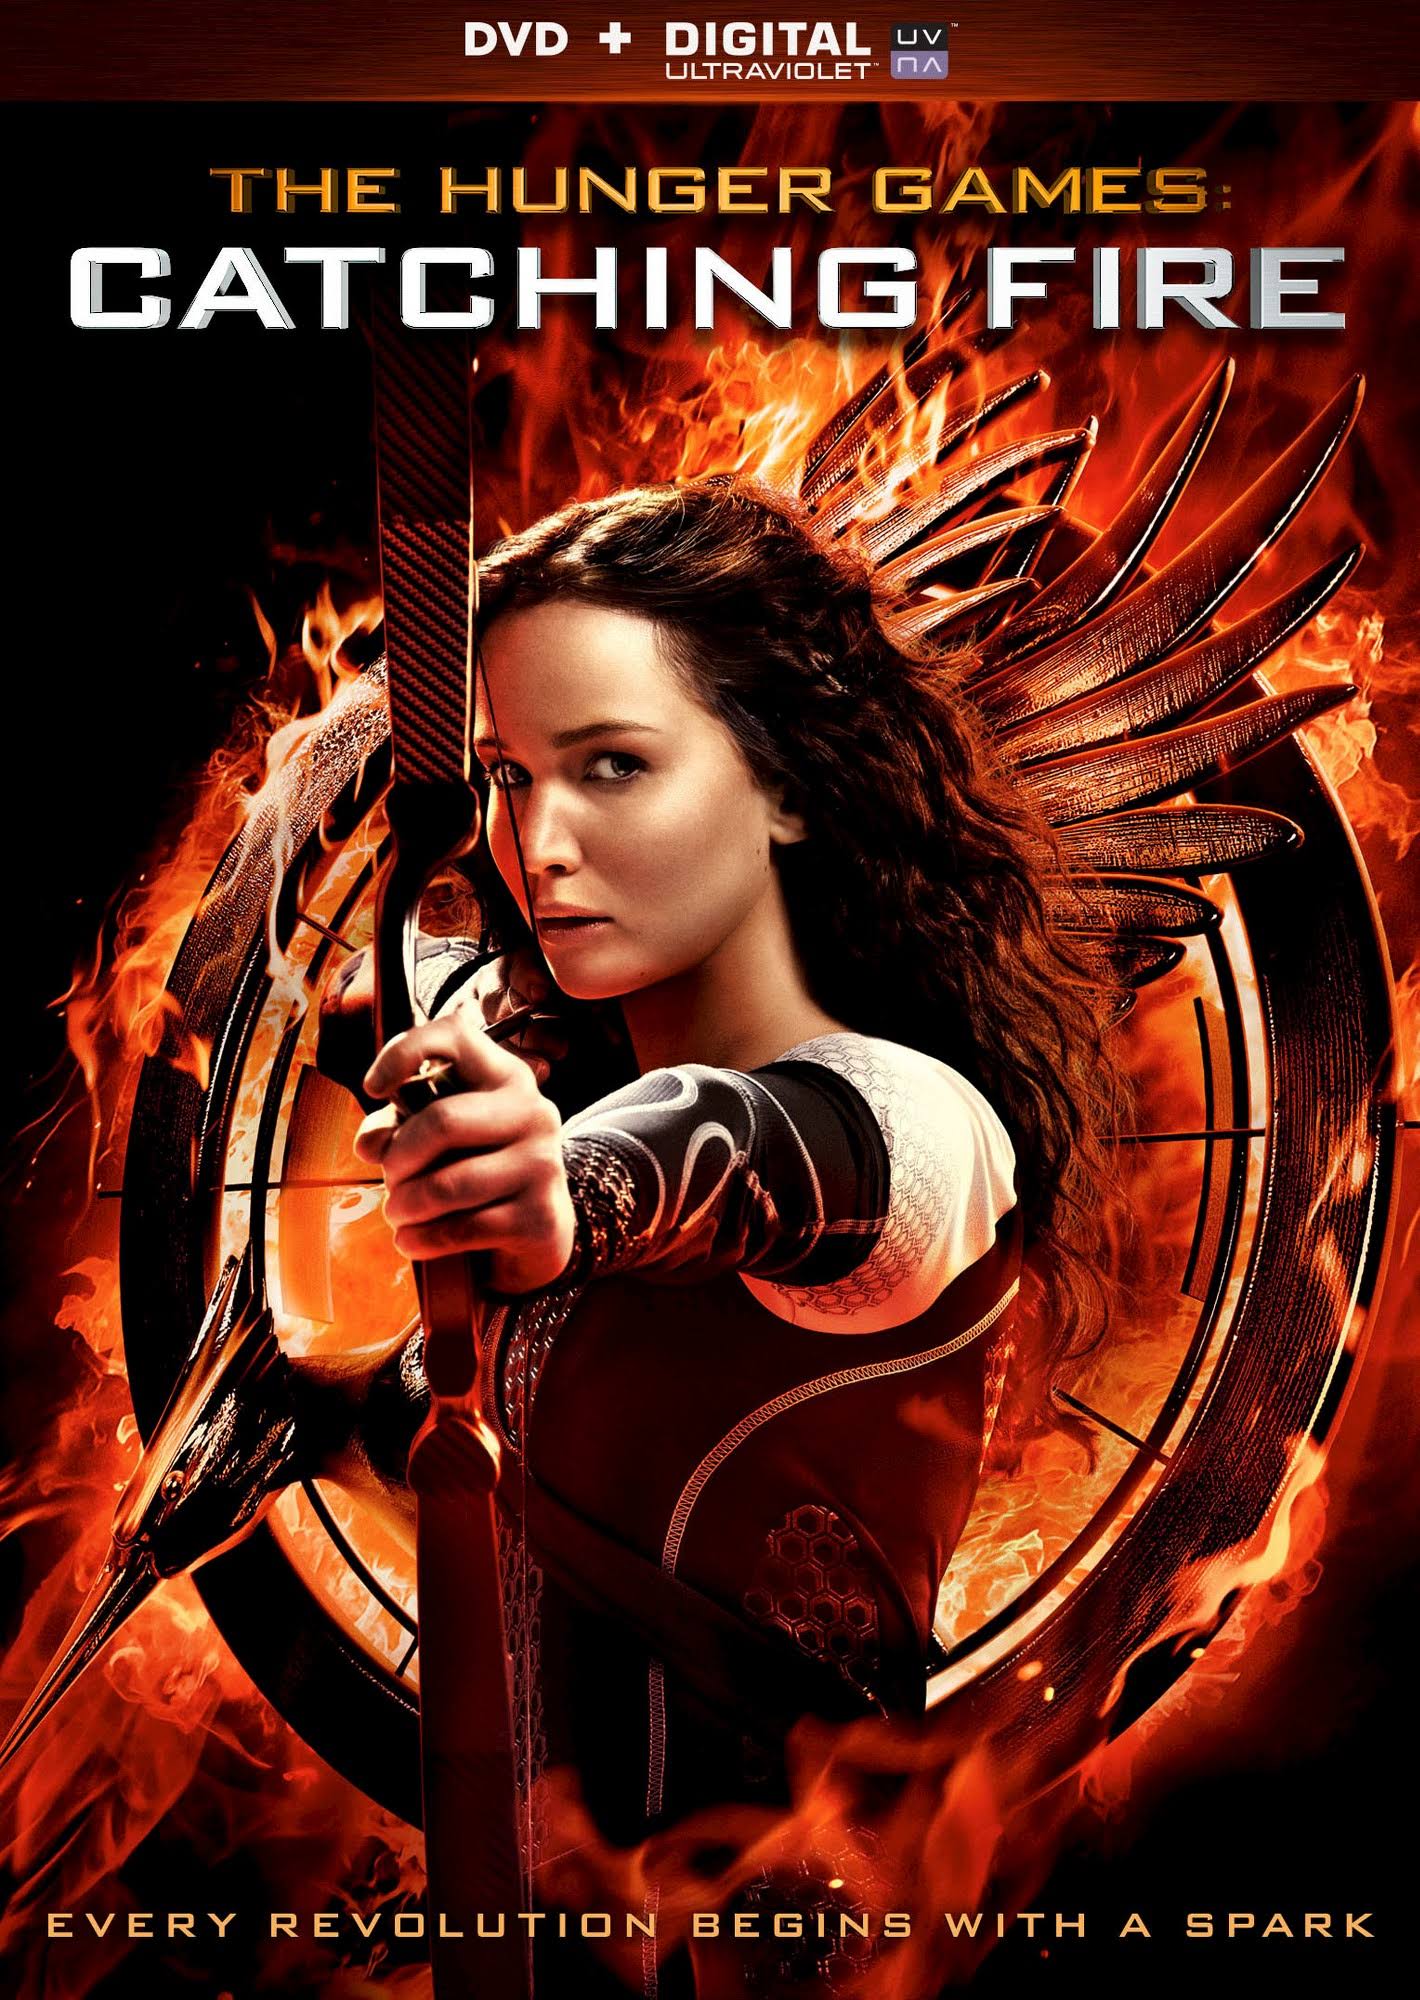 The Hunger Games: Catching Fire DVD